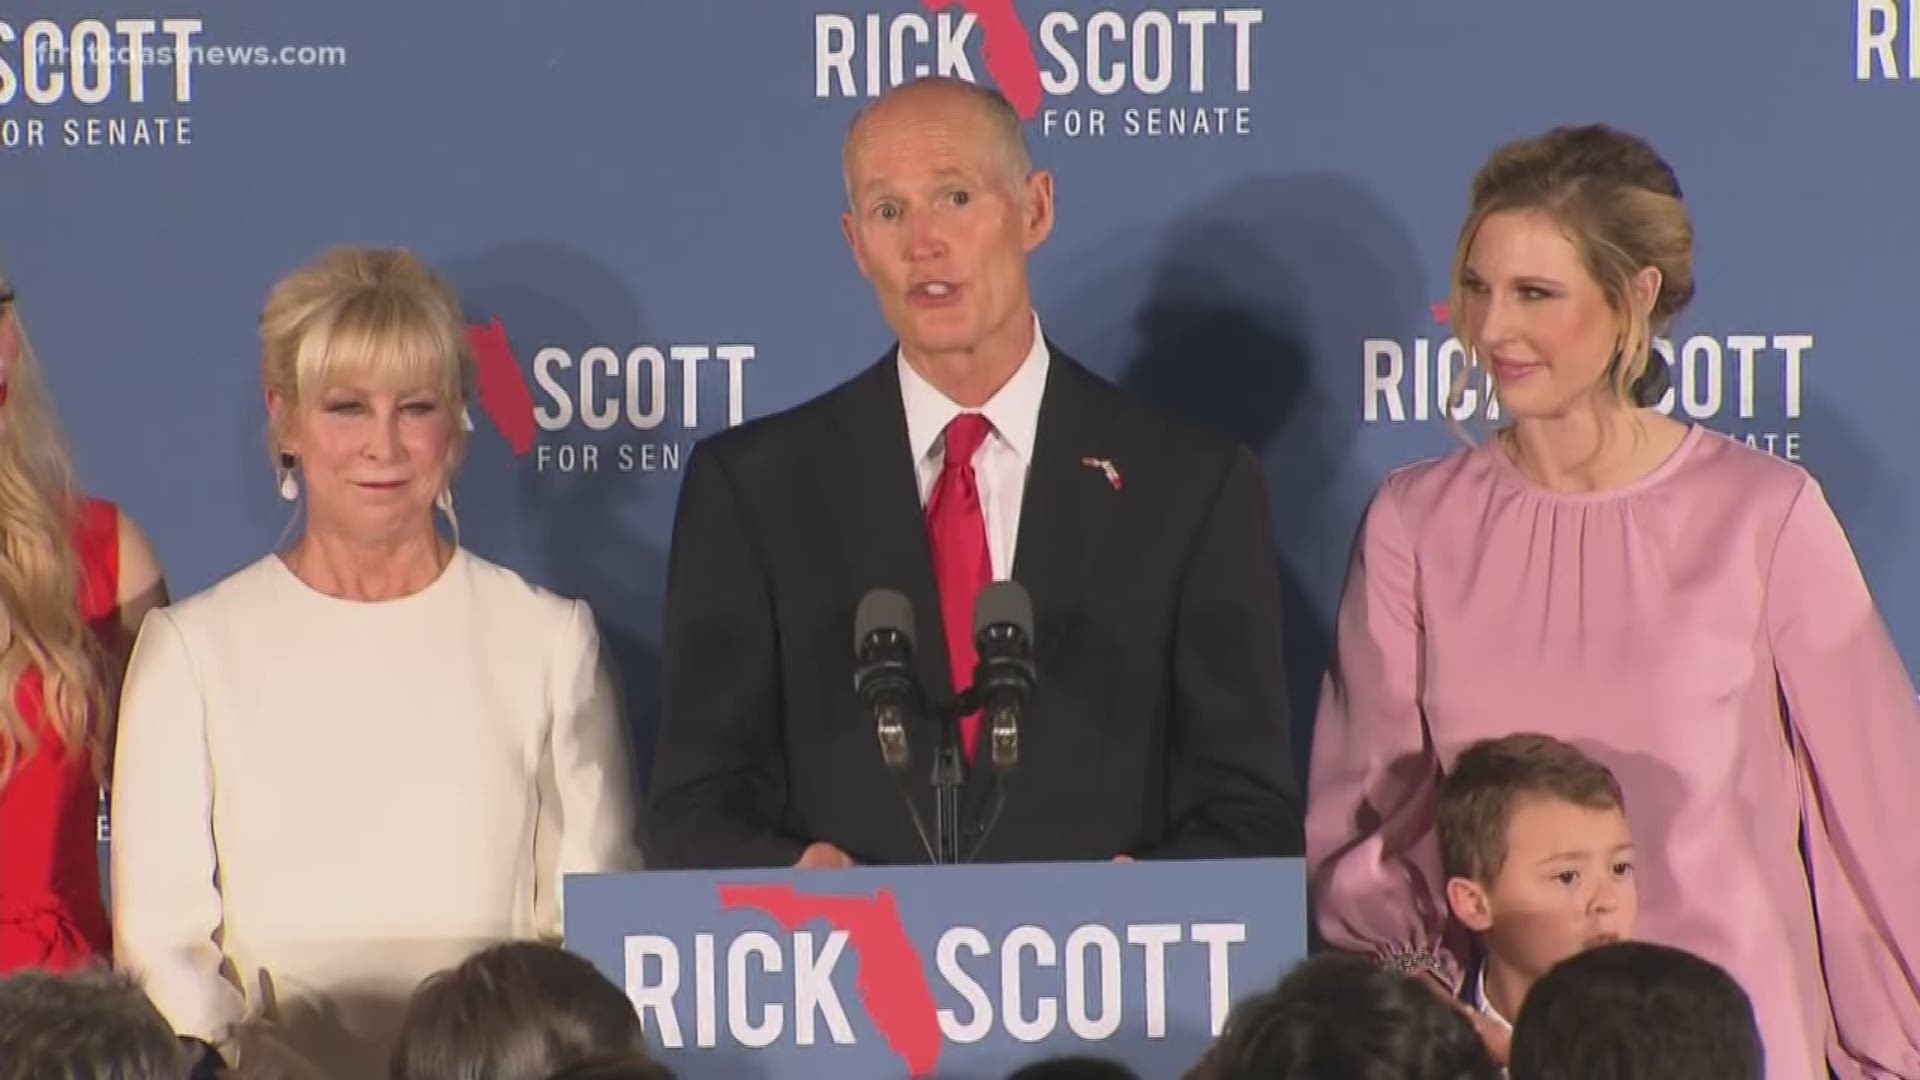 In a victory speech, Rick Scott announced his win over incumbent Nelson